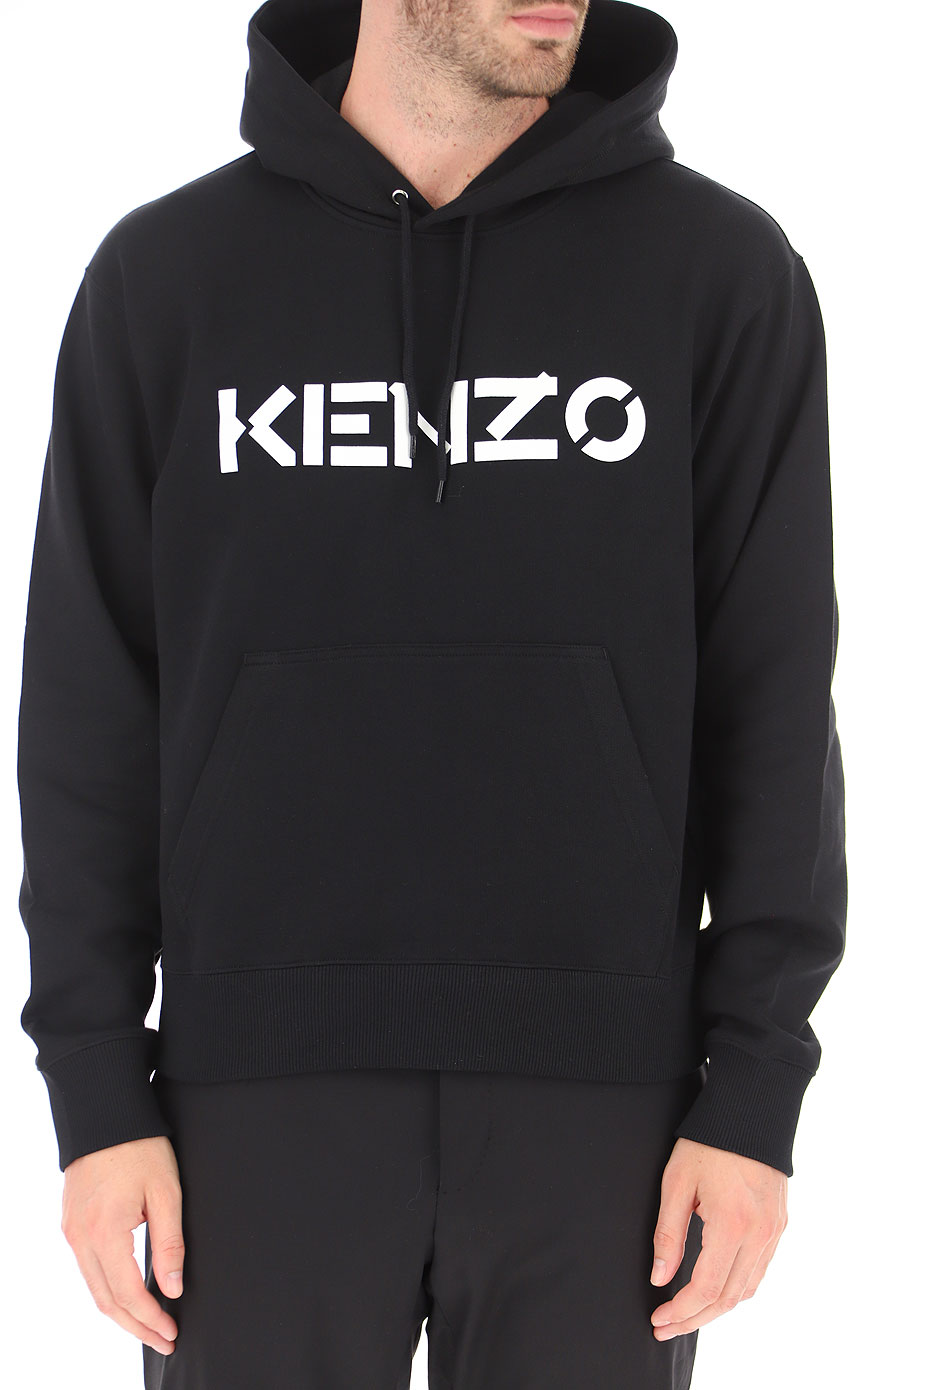 Mens Clothing Kenzo, Style code: 5sw300-4md-99